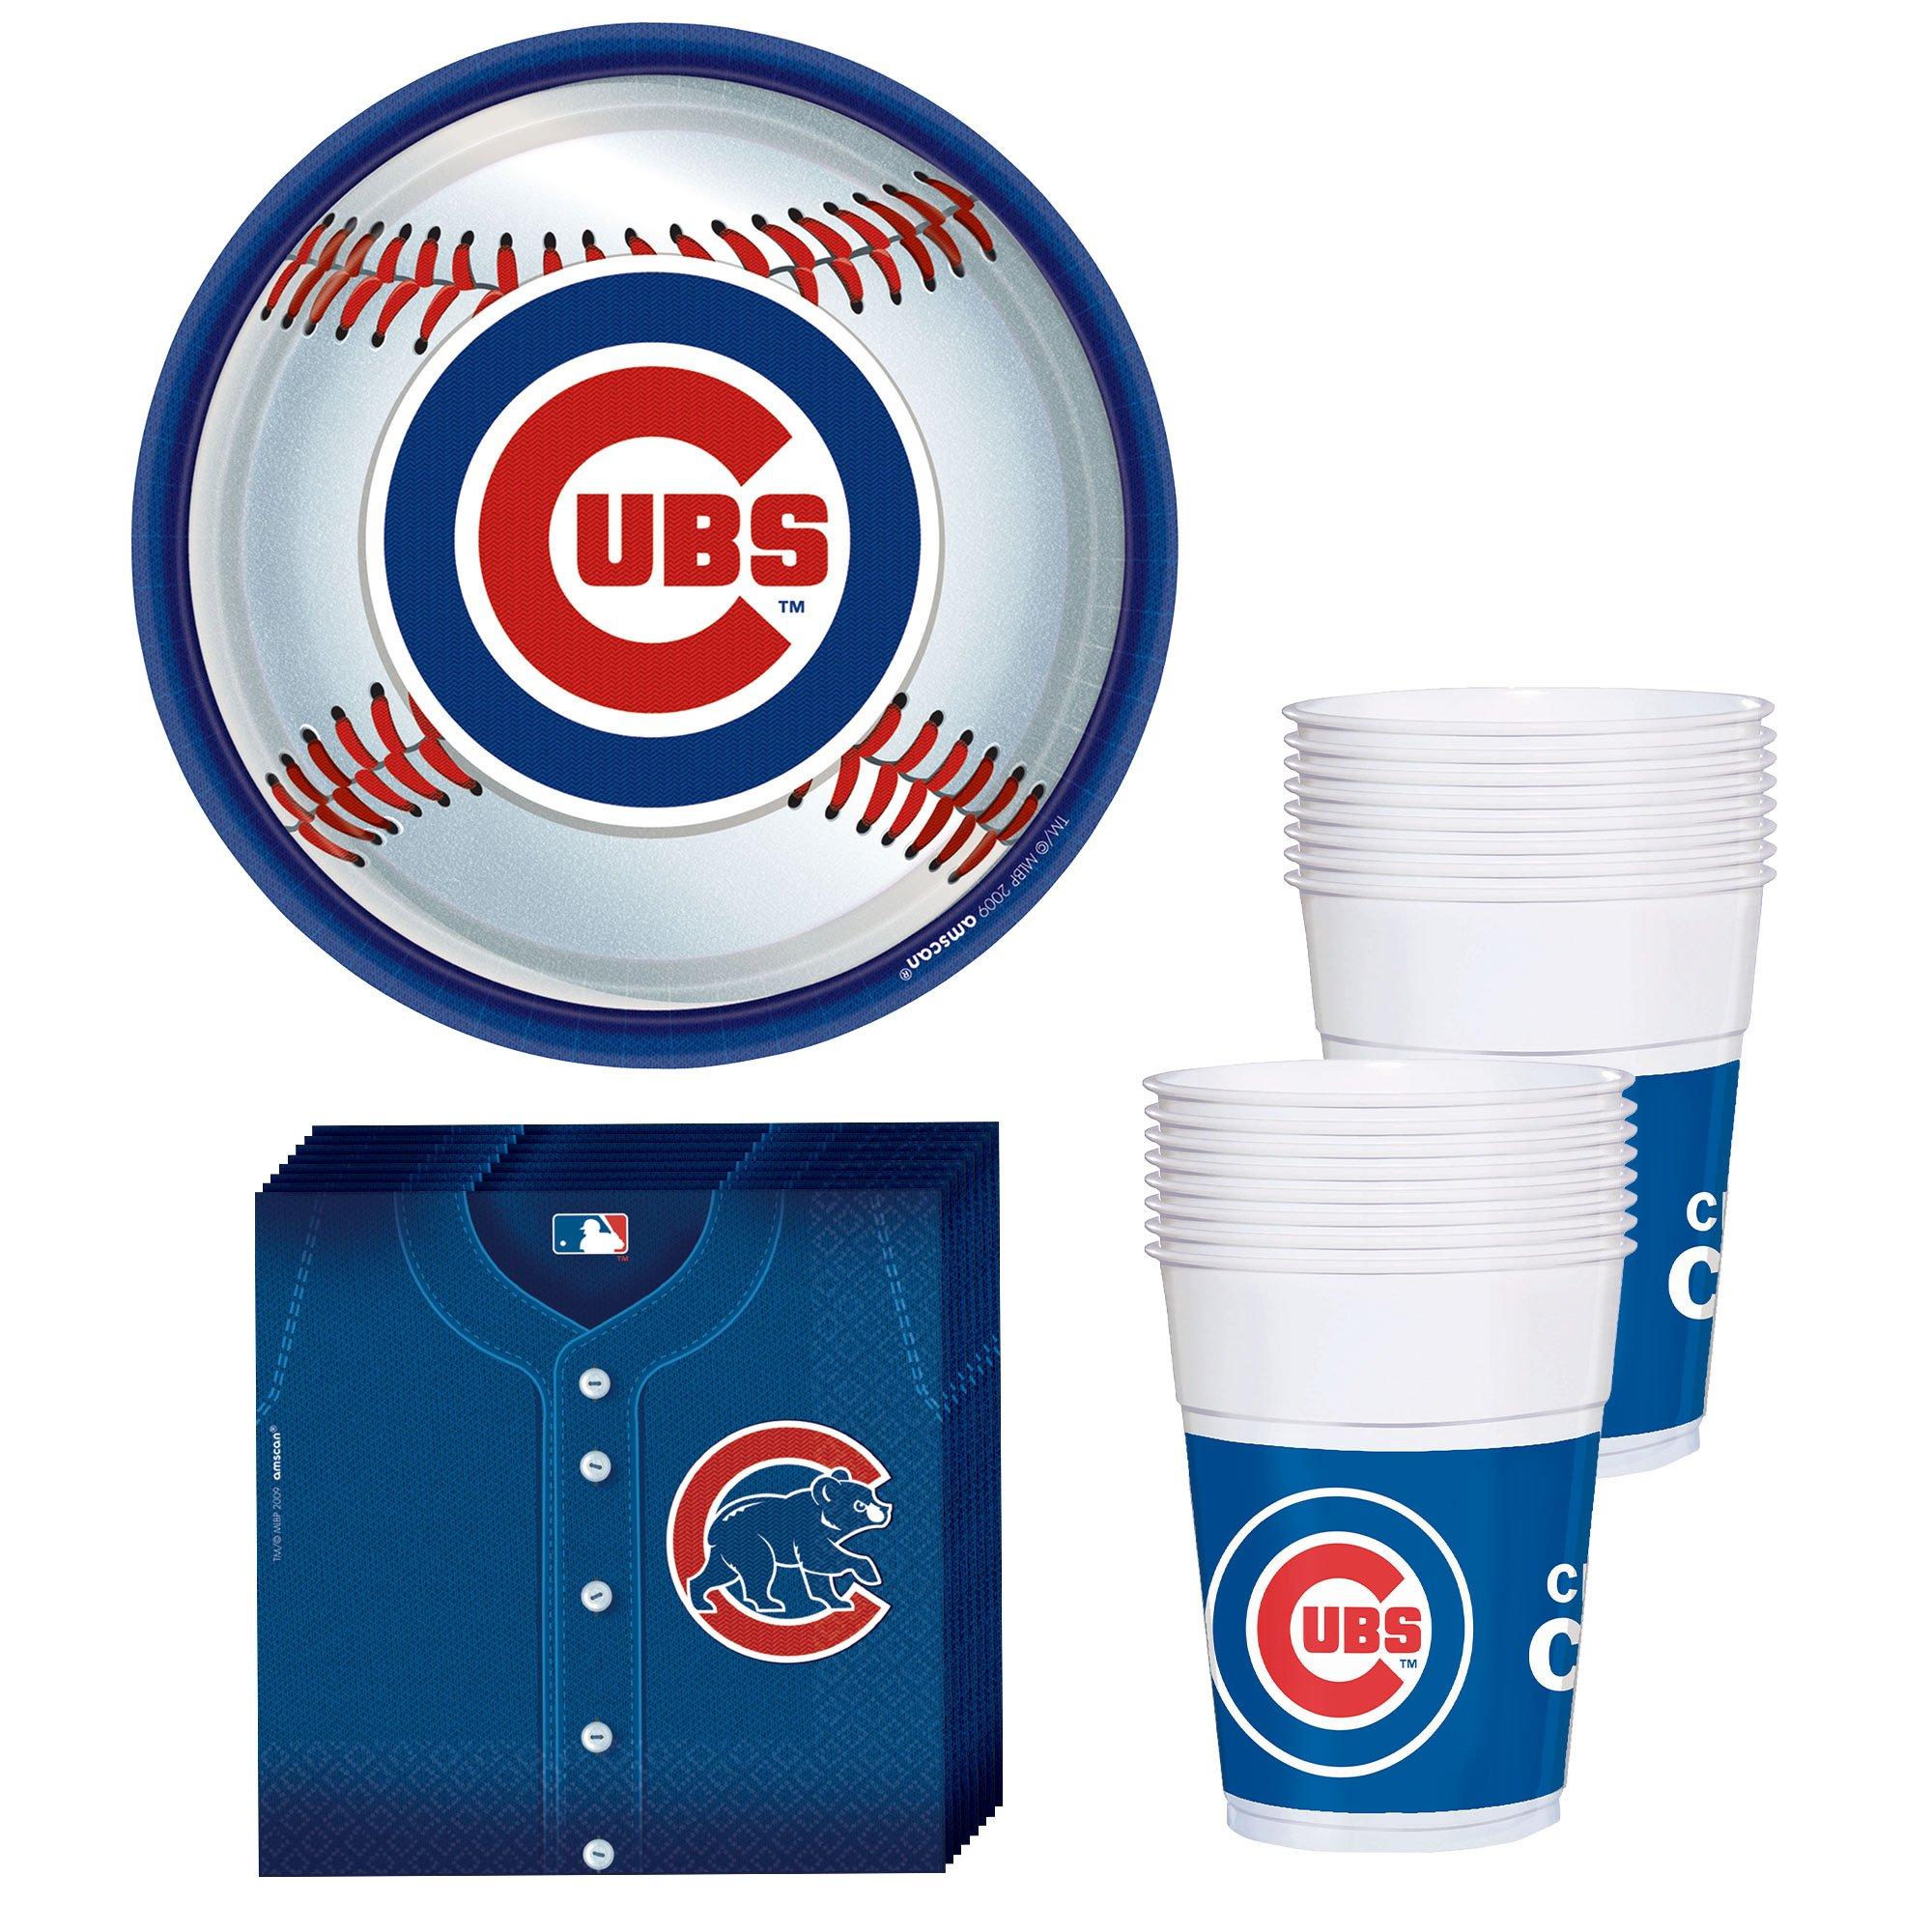 Chicago Cubs on X: Dressed for the occasion.